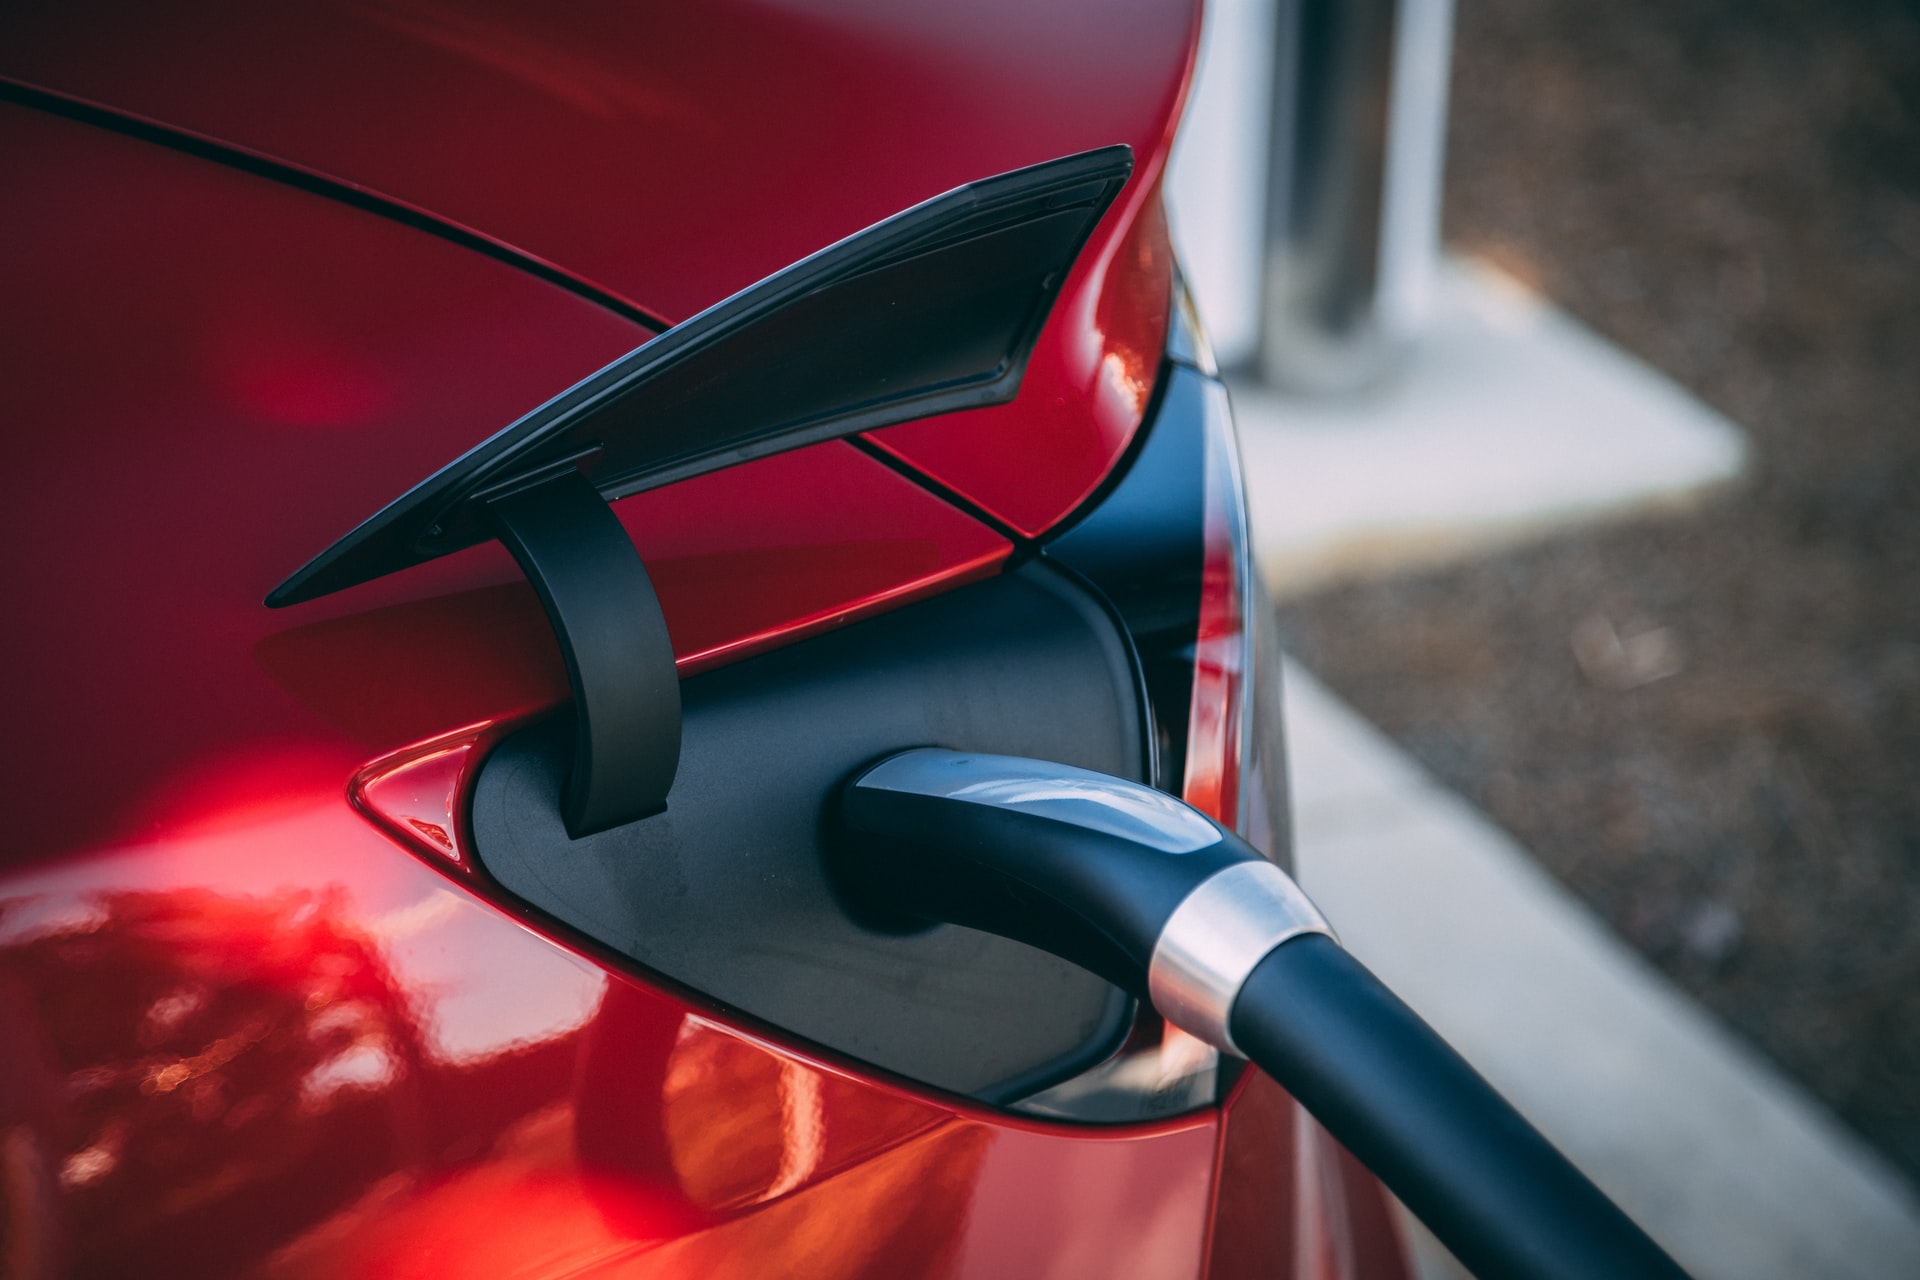 Infrastructure Spend Kicks EV Charging Into Gear, Utilities Collaborate to Electrify Interstate Networks